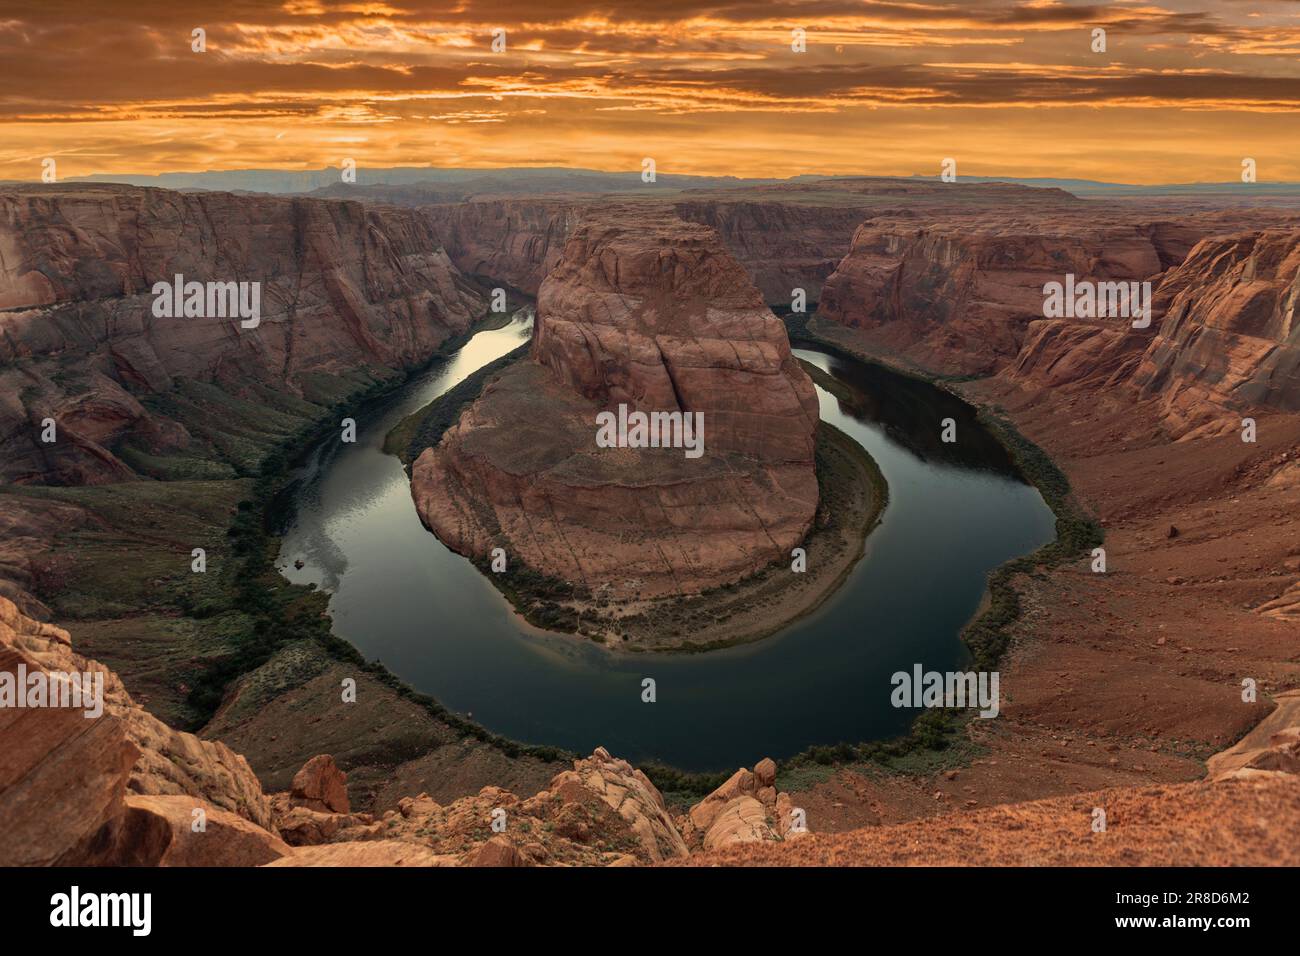 Sunset view of Horseshoe Bend and the Colorado River near Page, Arizona. Stock Photo